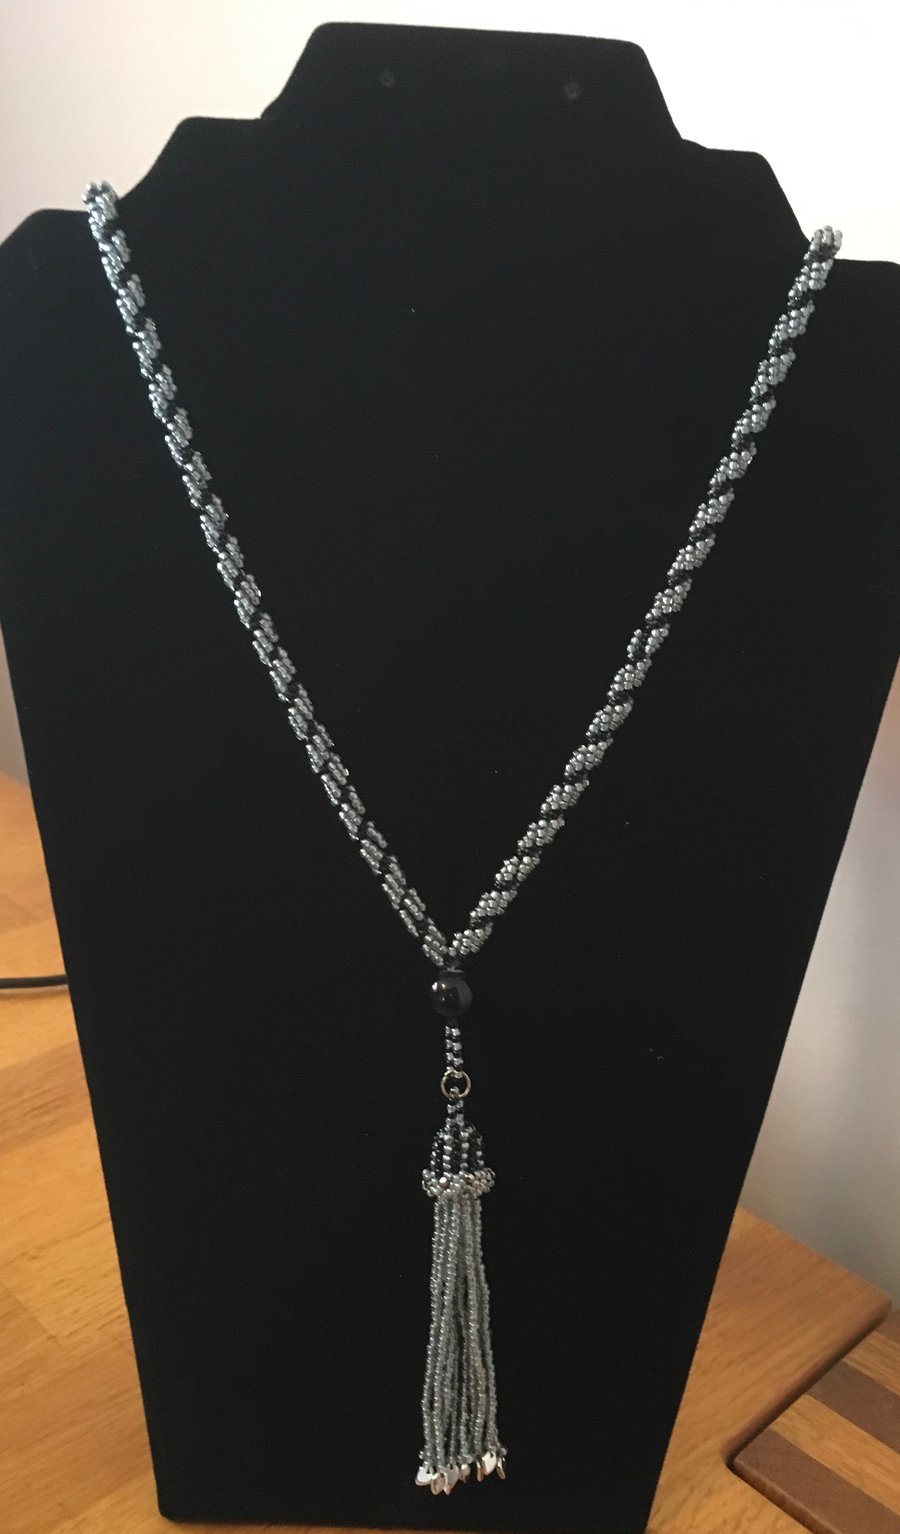 Grey and black beaded lariat necklace